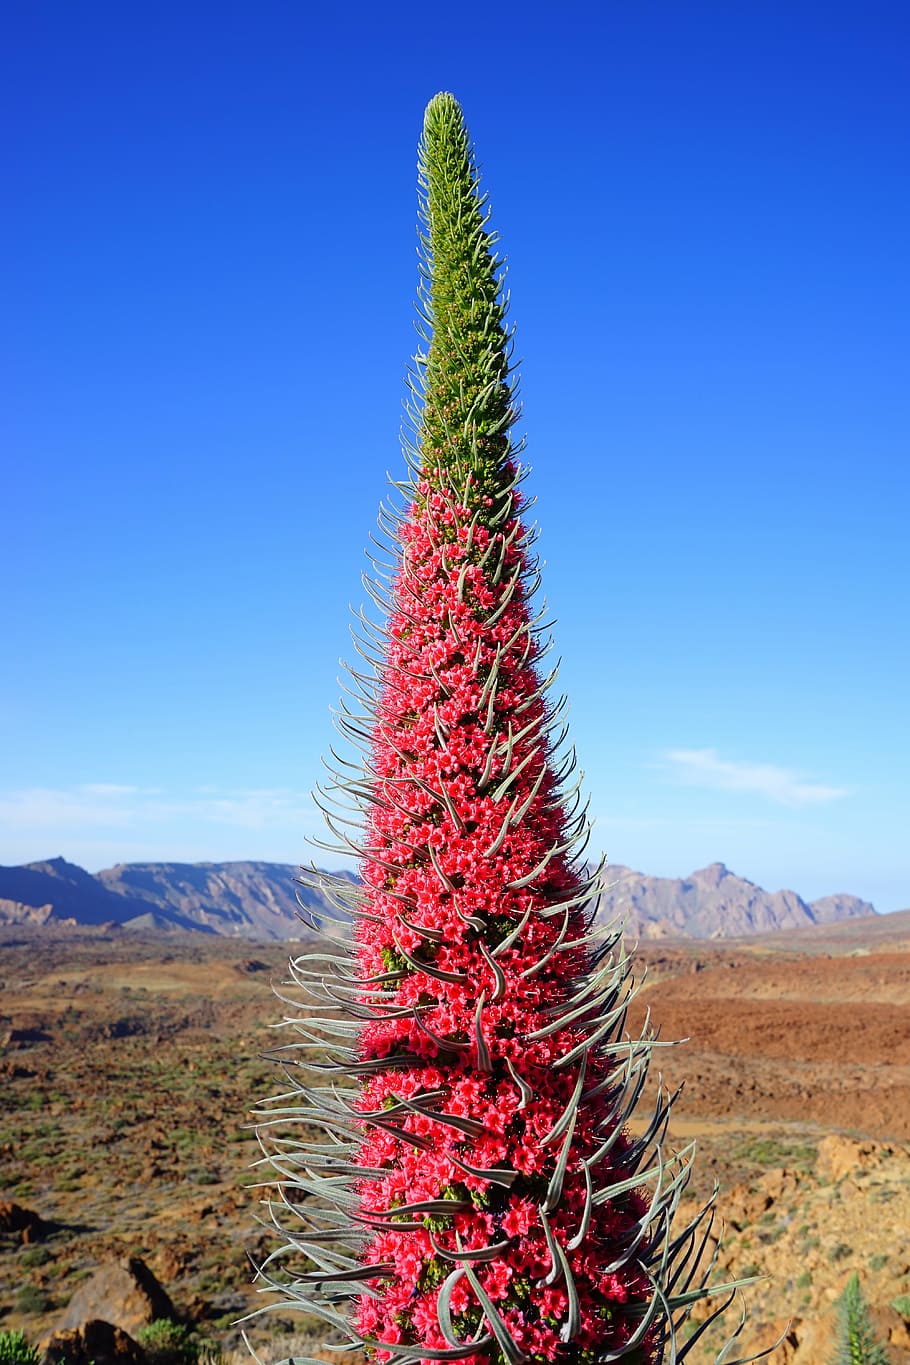 pink and green cactus under clear blue sky during daytime, tajinaste rojo